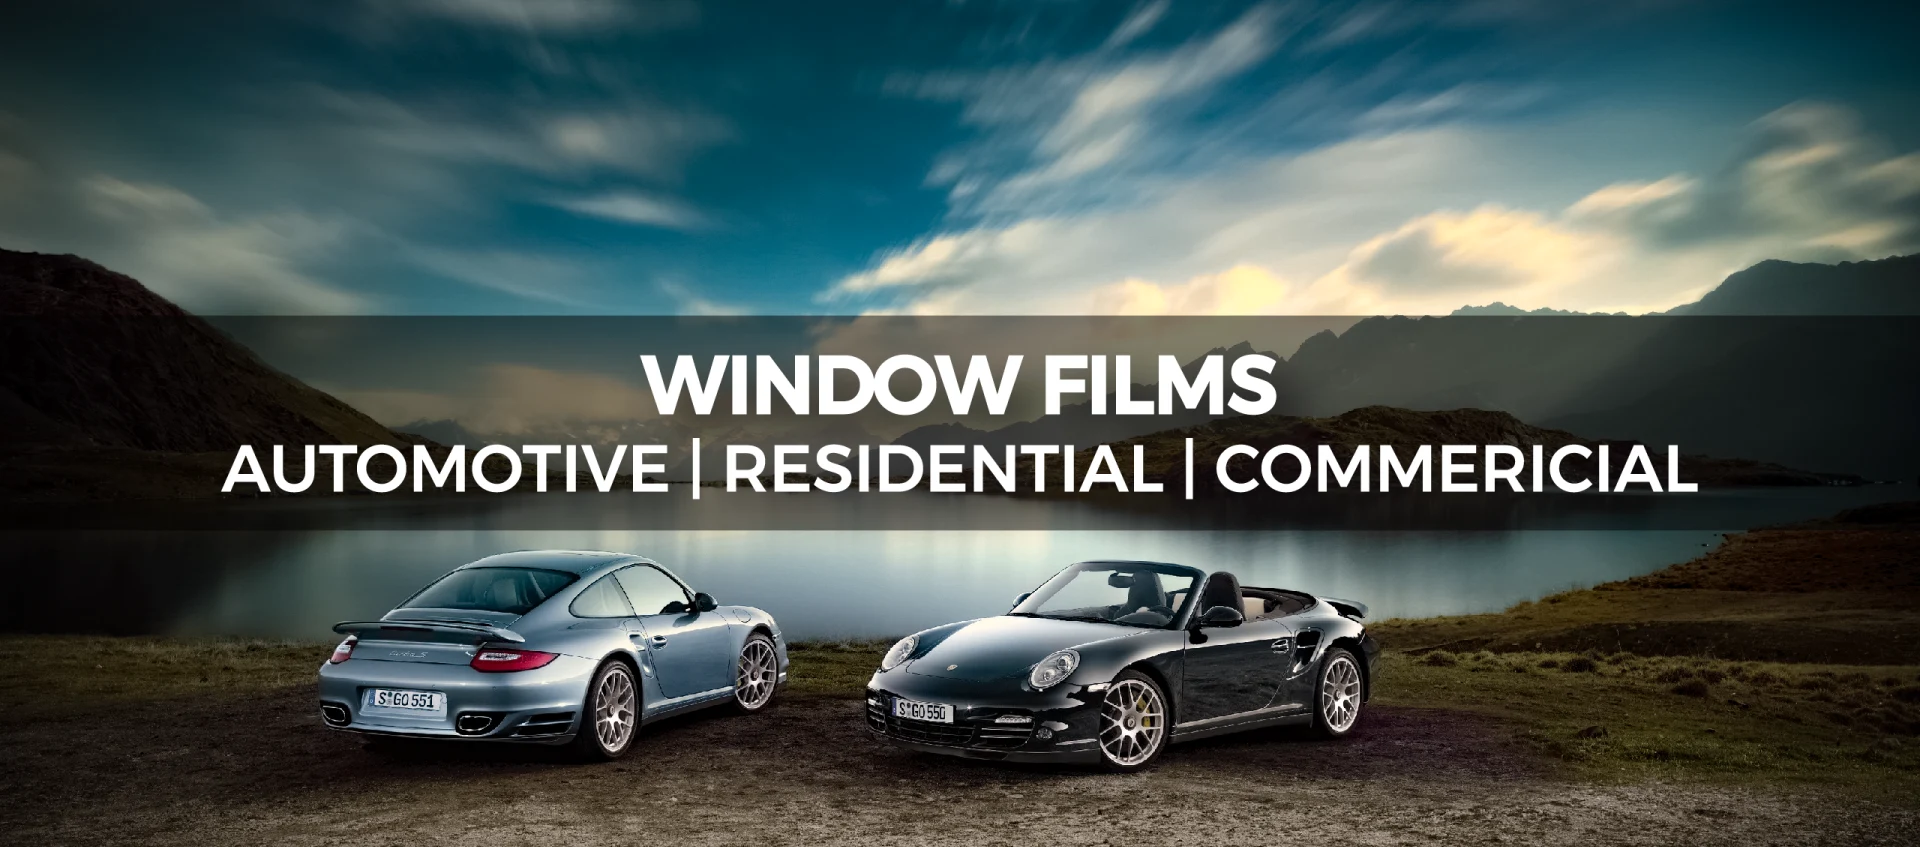 Window Films, Automotive & Residential Tint, Tinting Tools